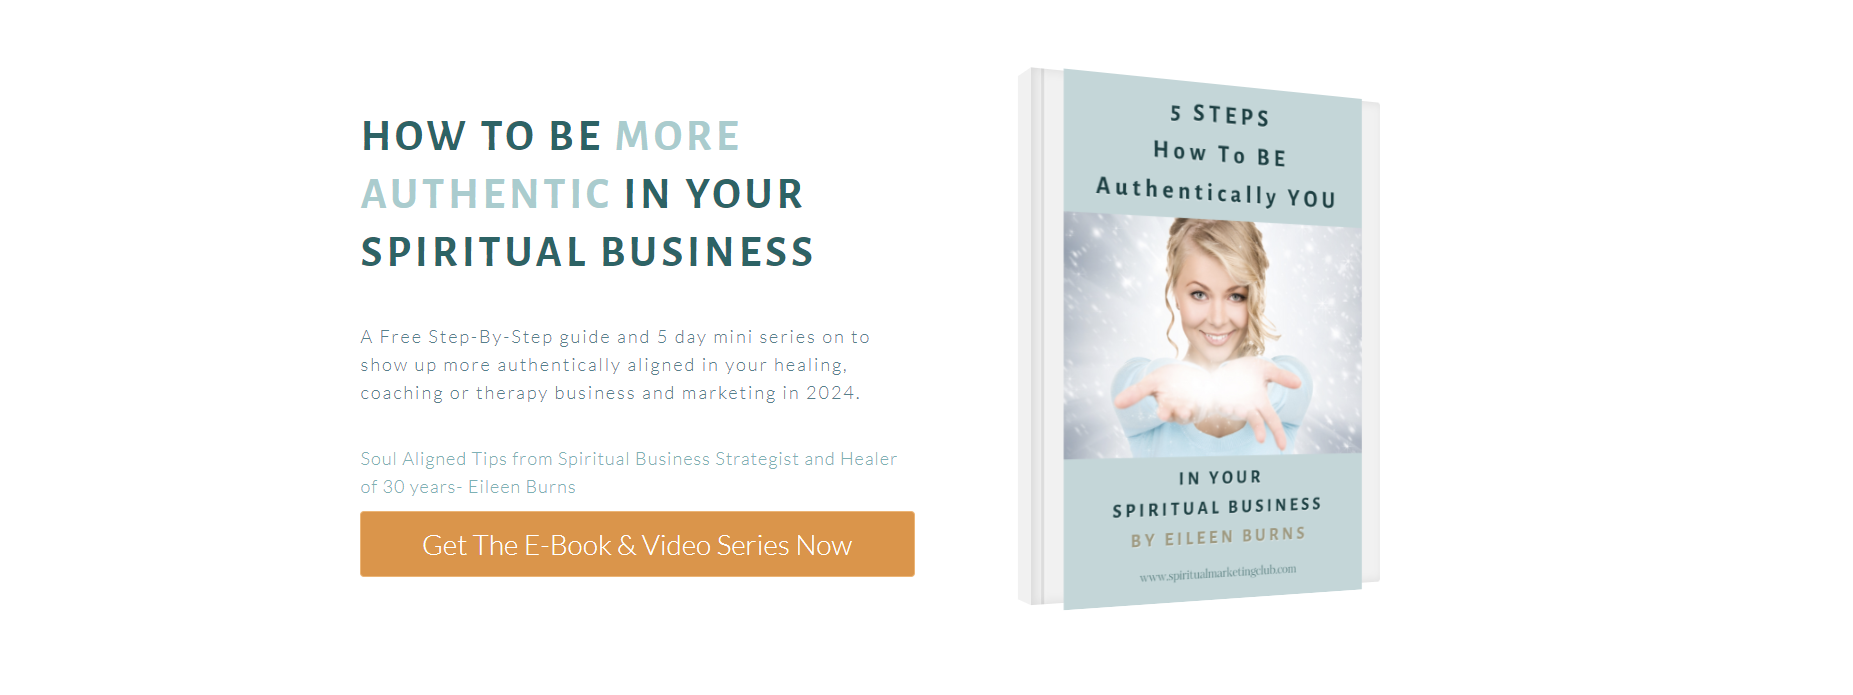 How To Be Authentic In Life And Business - spiritual business coach and soul empowerment teacher